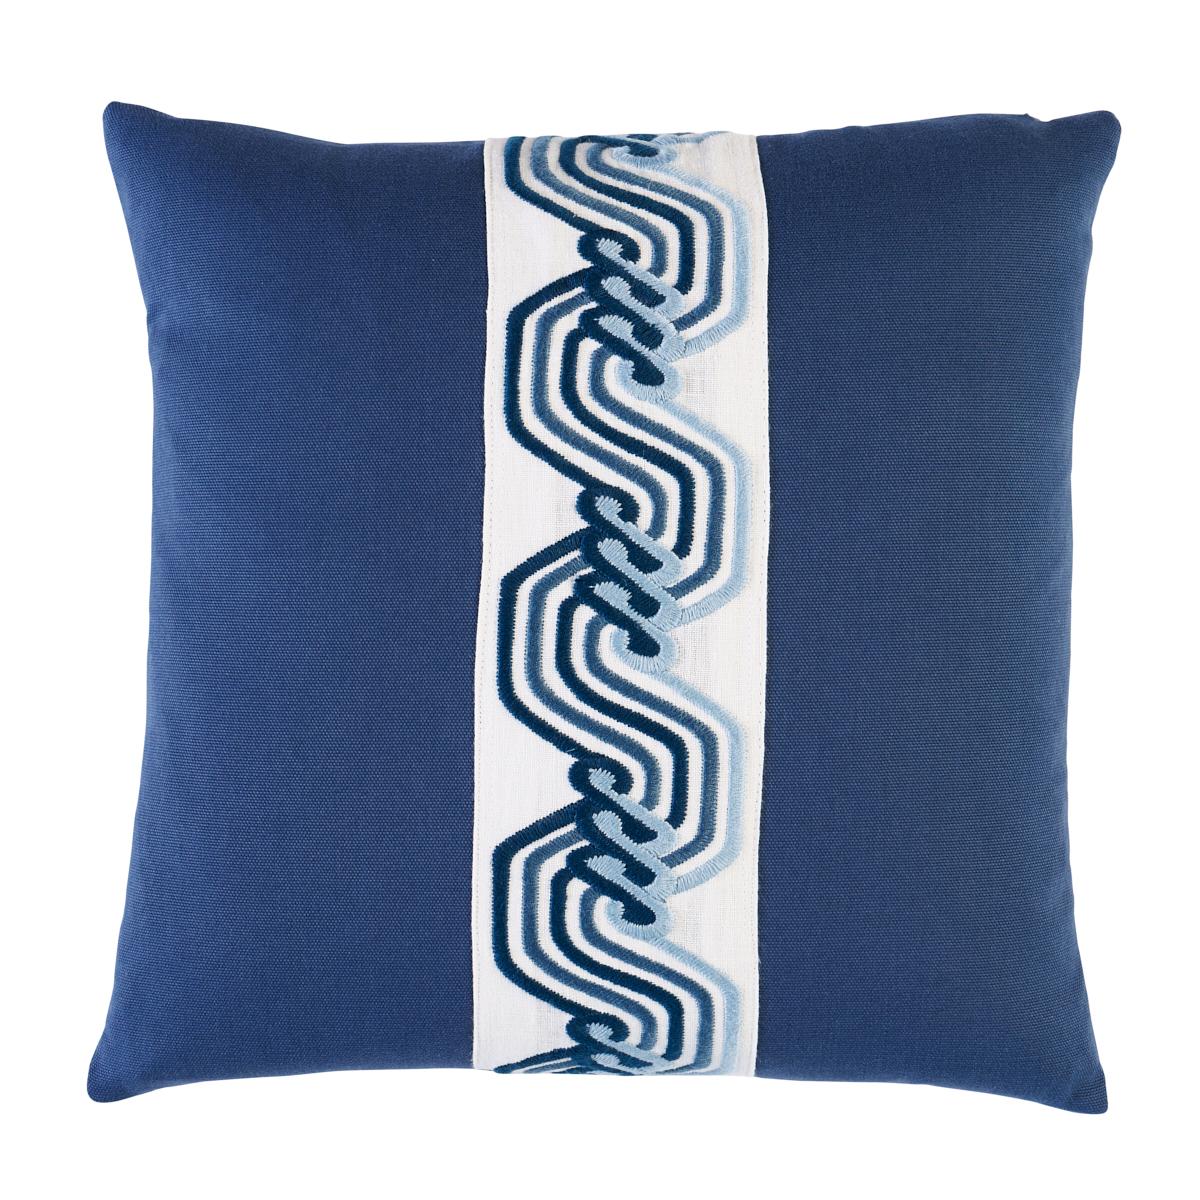 The Twist Embroidered Pillow 18" For Sale